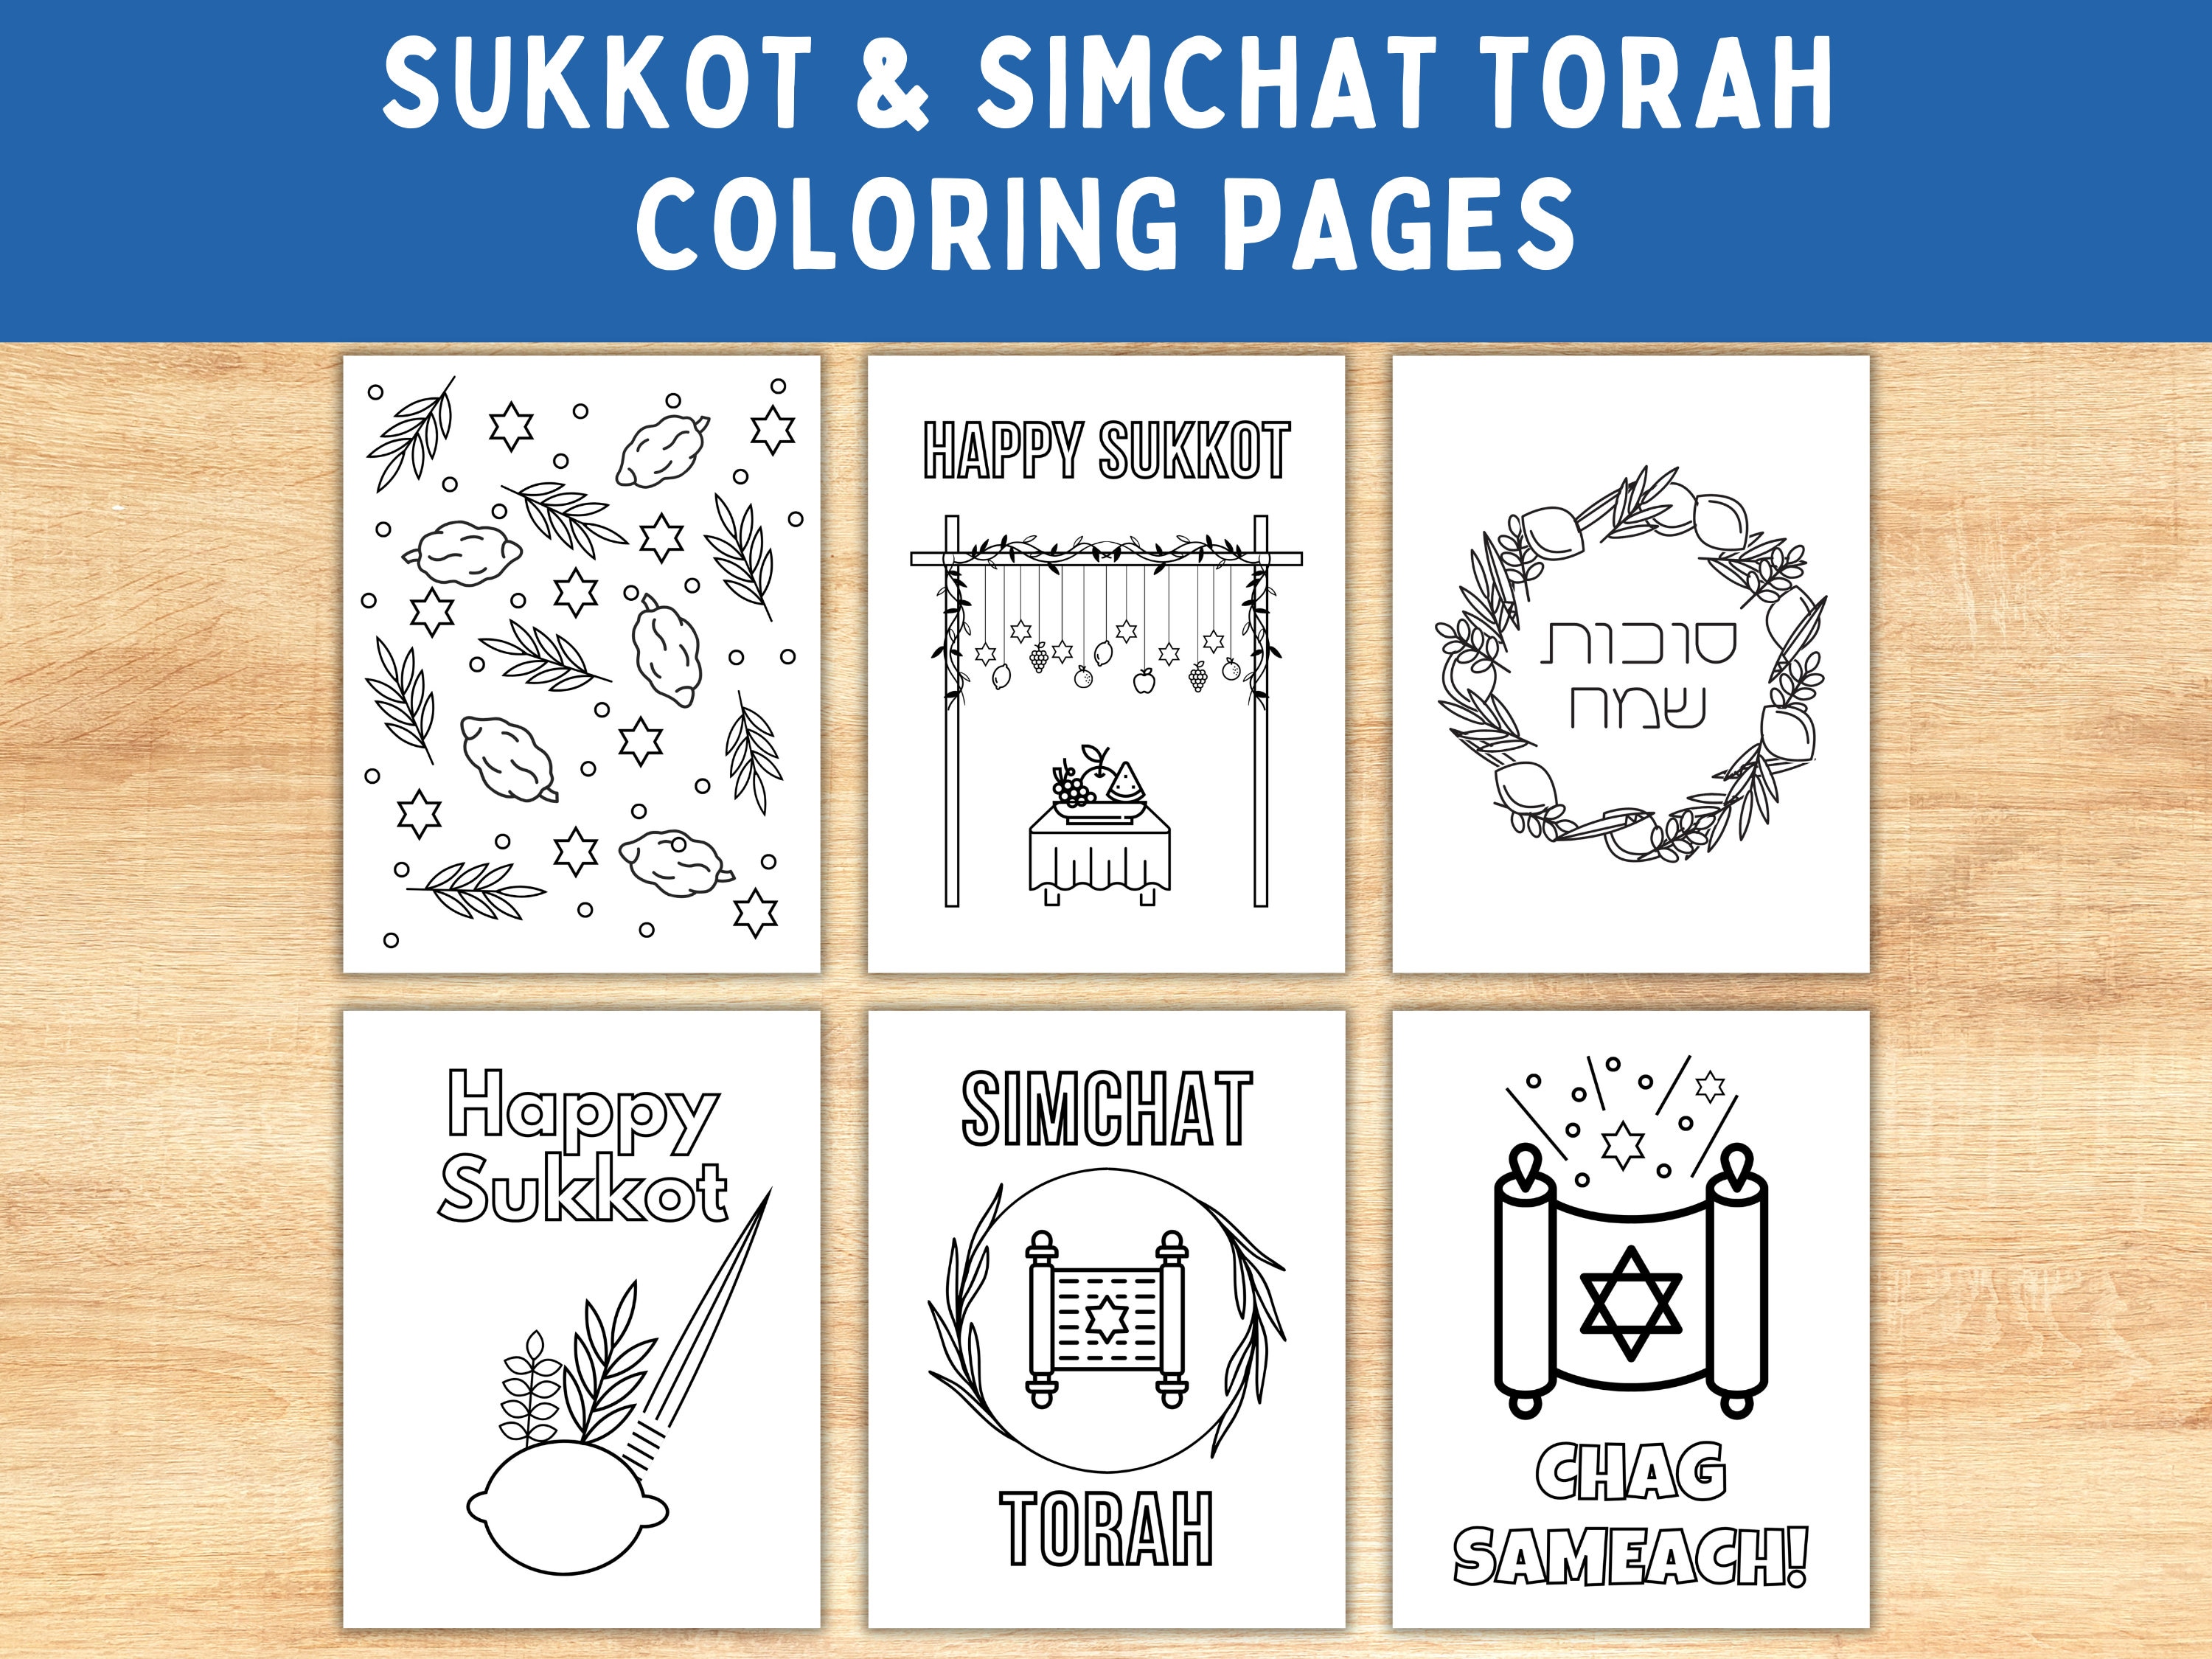 Sukkot and simchat torah coloring pages printable jewish holiday crafts printable jewish holiday activities instant download